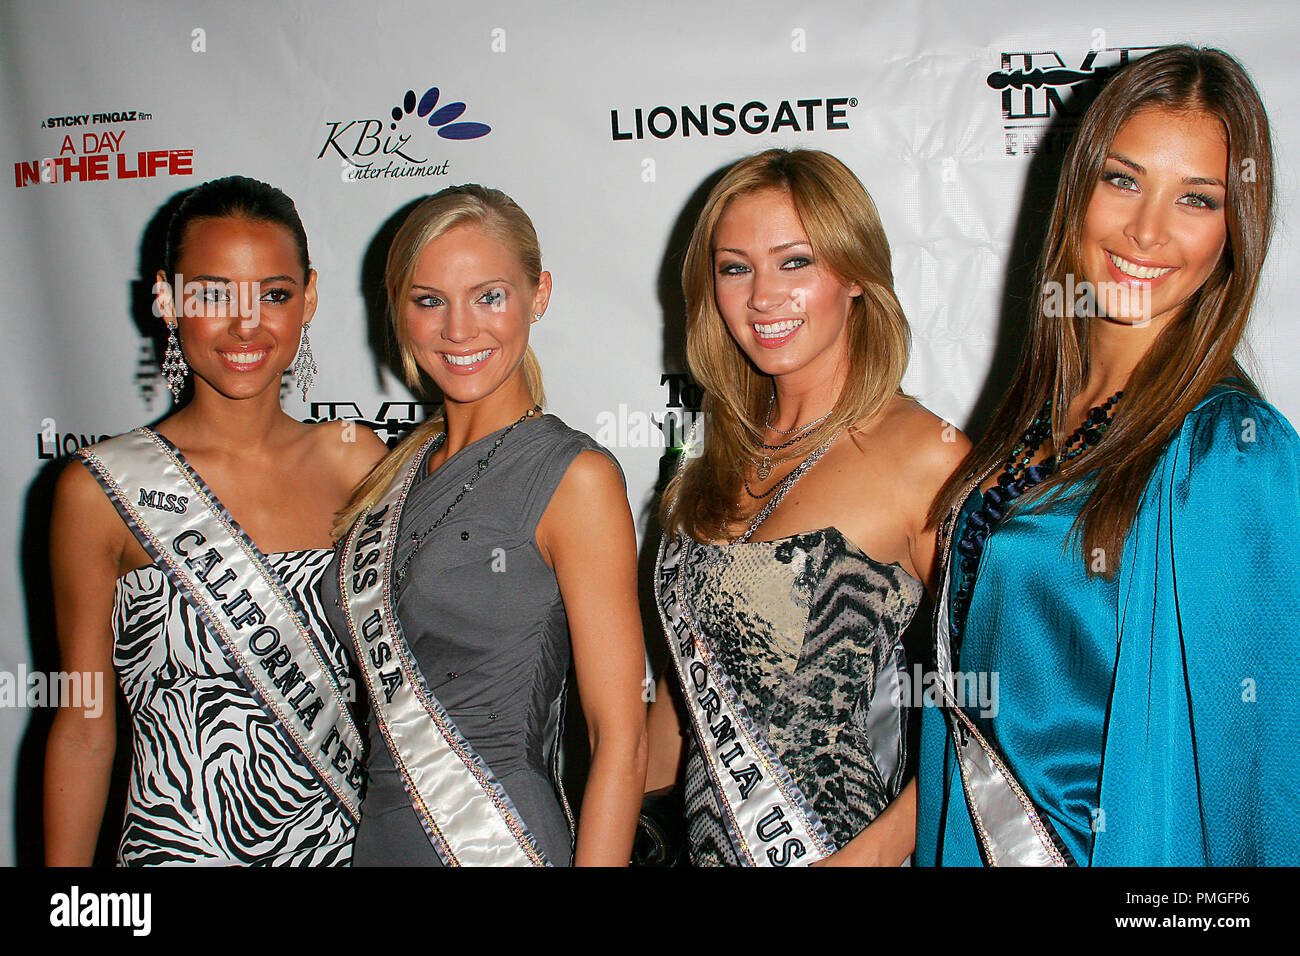 Miss California Teen USA Chelsea Gilligan, Miss USA Kristen Dalton, Miss California USA Tami Farrell and Miss Universe Dayana Mendoza at the Lions Gate Films and Major Independents premiere of 'A Day in the Life'- Arrivals held at the Silver Screen Theater at the Pacific Design Center in West Hollywood, CA, July 2, 2009.  Photo by: PictureLux File Reference # 30038 001PLX   For Editorial Use Only -  All Rights Reserved Stock Photo